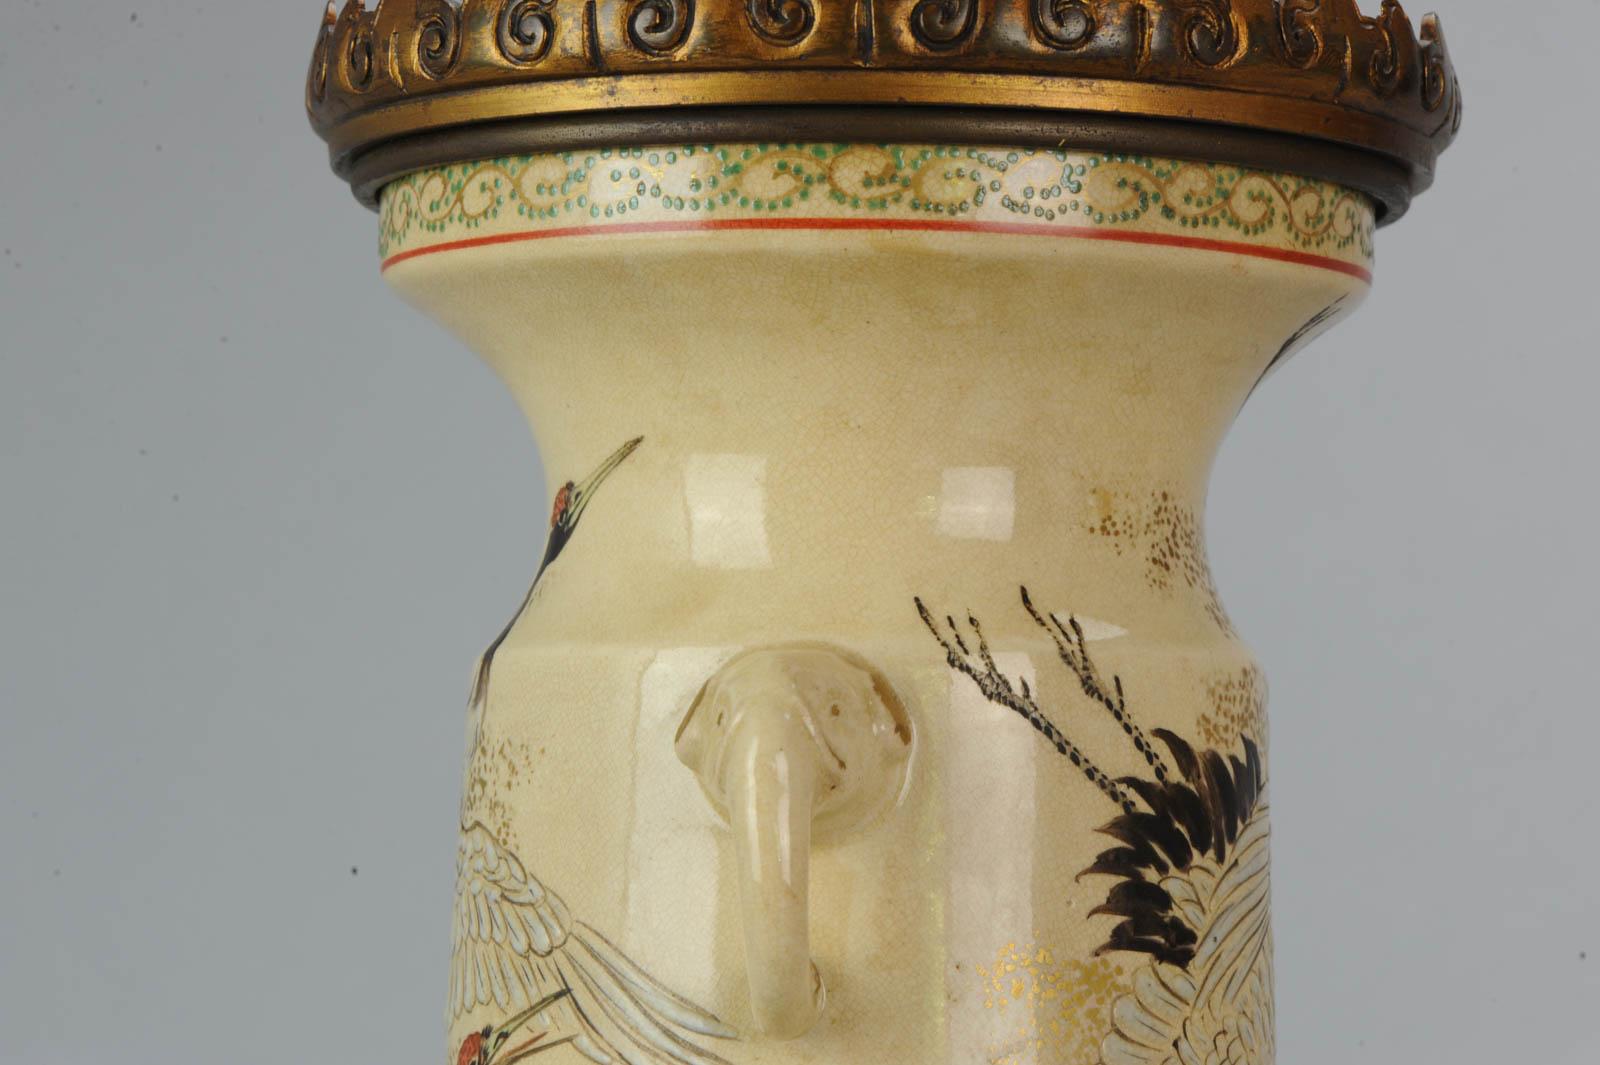 Lovely Antique Satsuma Lamp Vase Set with Cranes and Turtles, Japan 19th Century For Sale 4